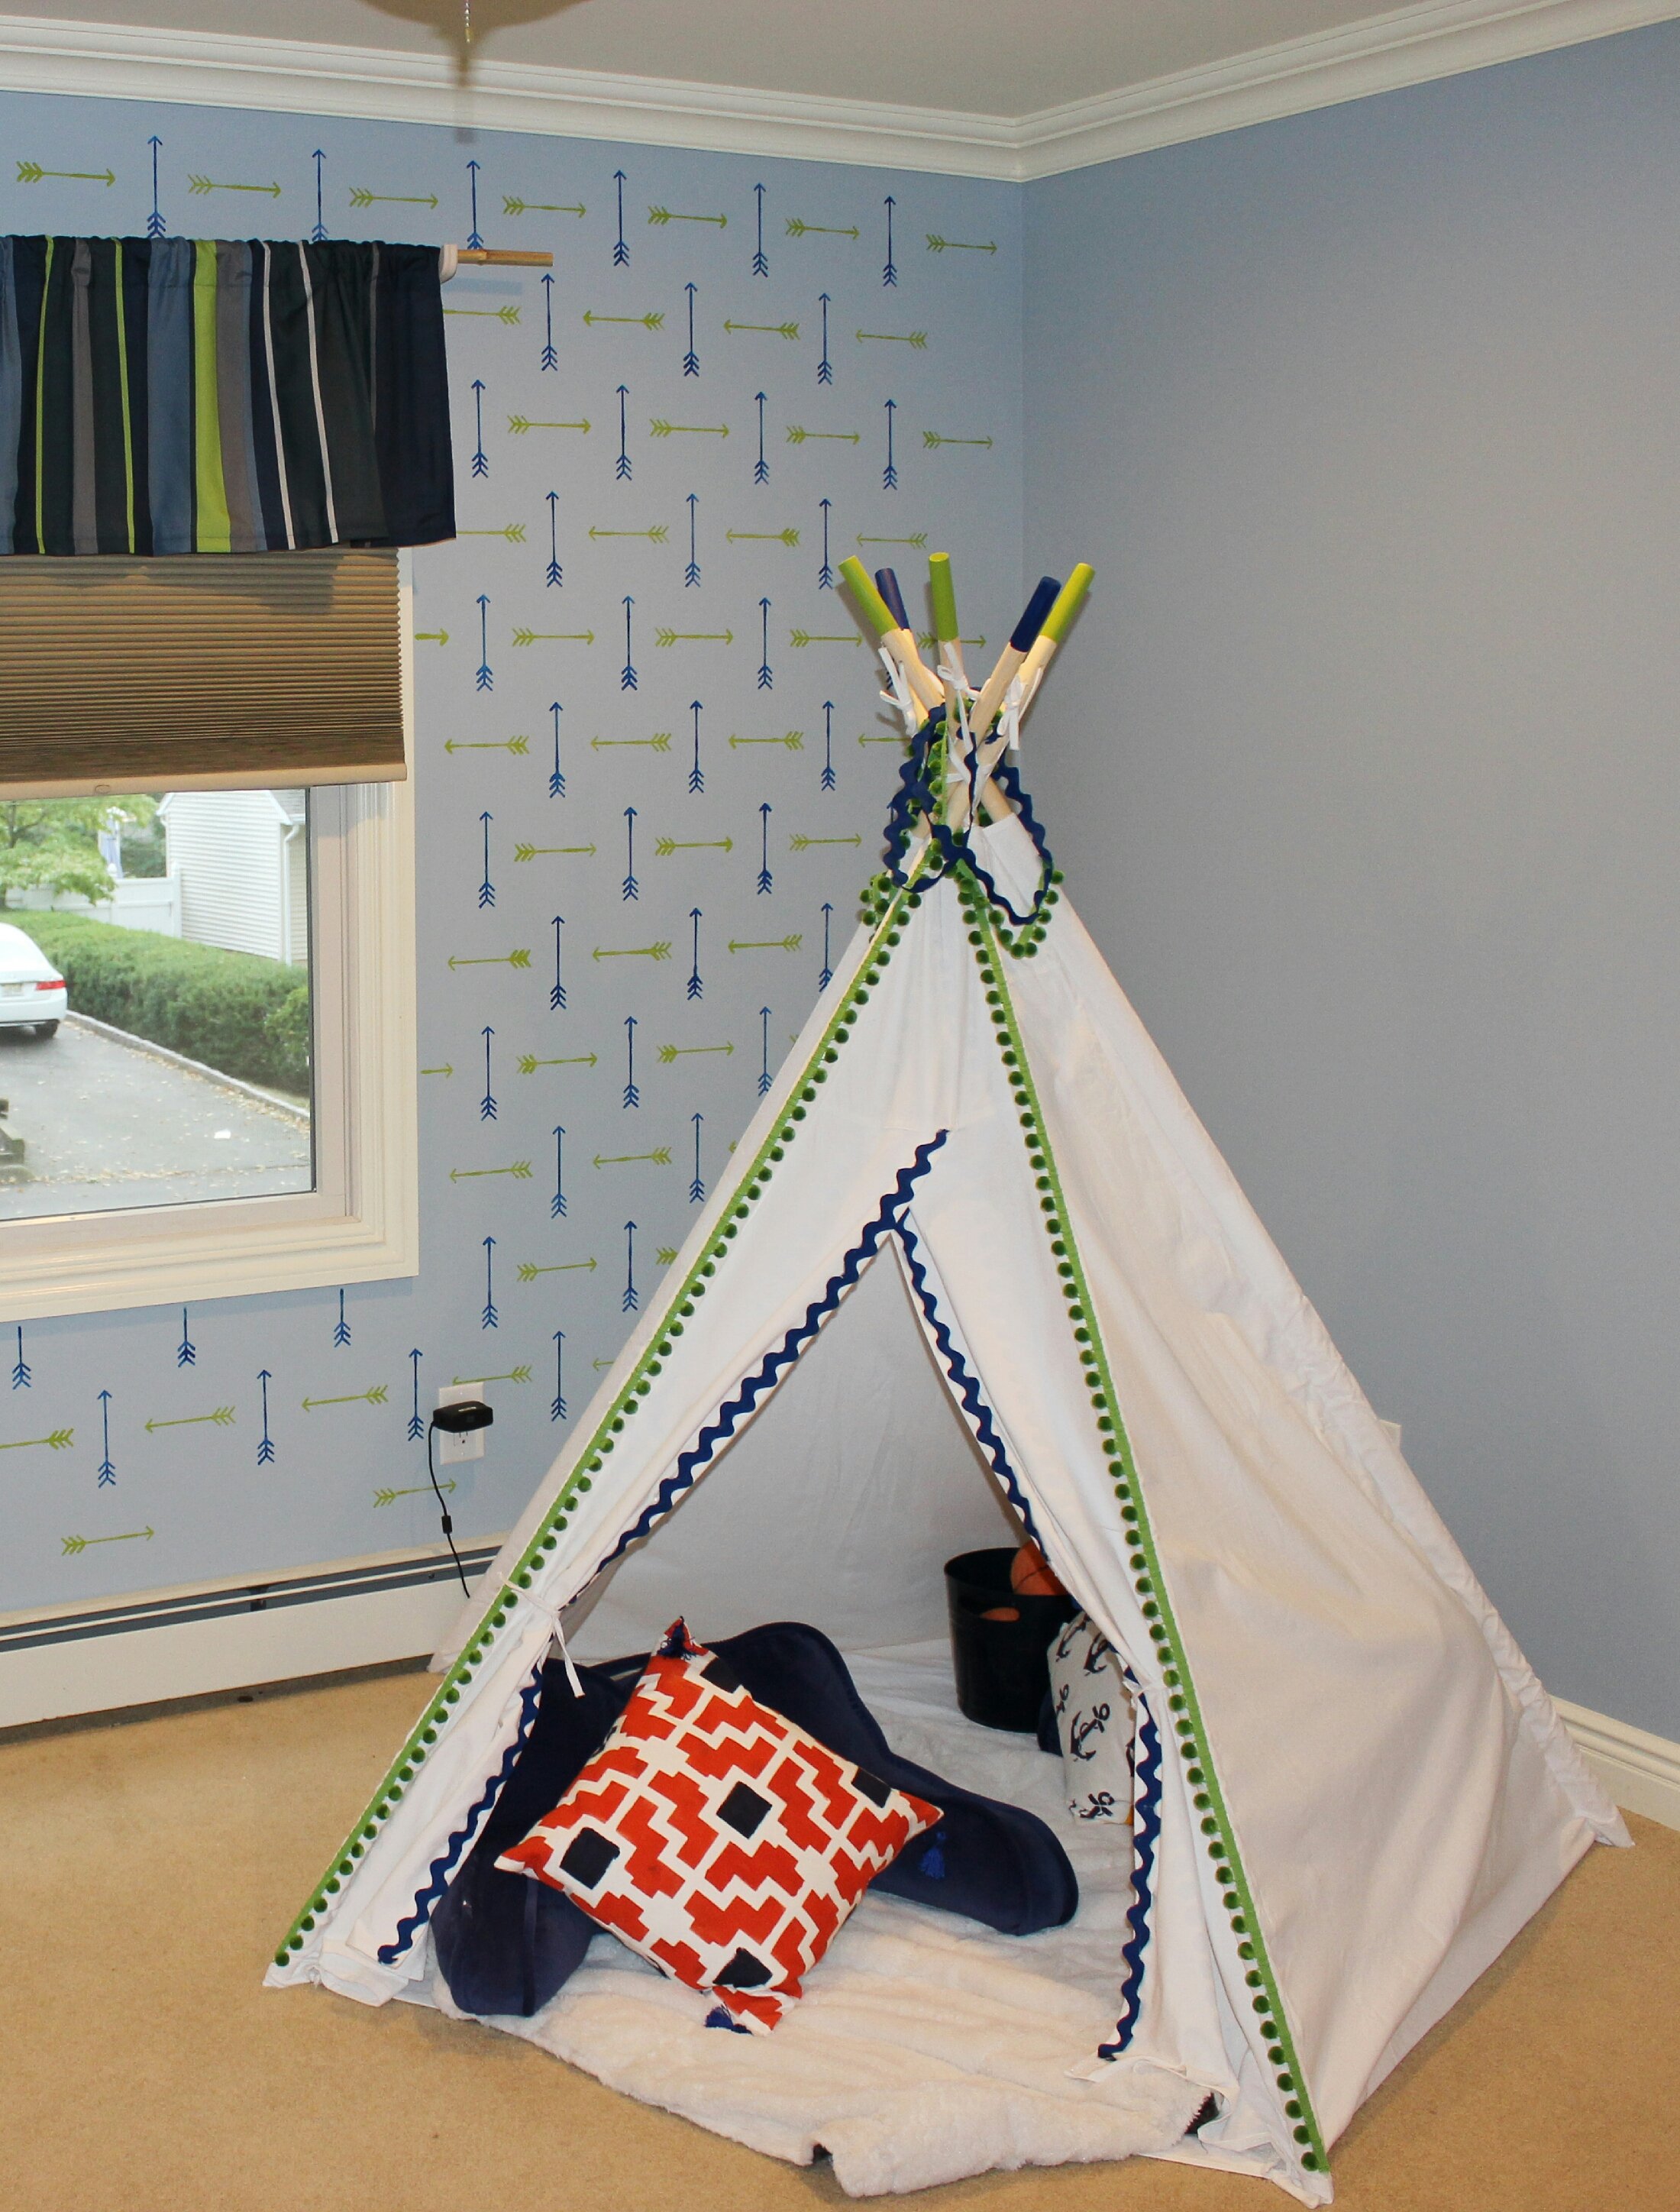 A white canvas teepee in a tribal stenciled boys bedroom using the Tribal Arrows Allover, a popular arrow motif wall pattern, from Cutting Edge Stencils. http://www.cuttingedgestencils.com/tribal-arrow-pattern-stencils-wall-decor.html